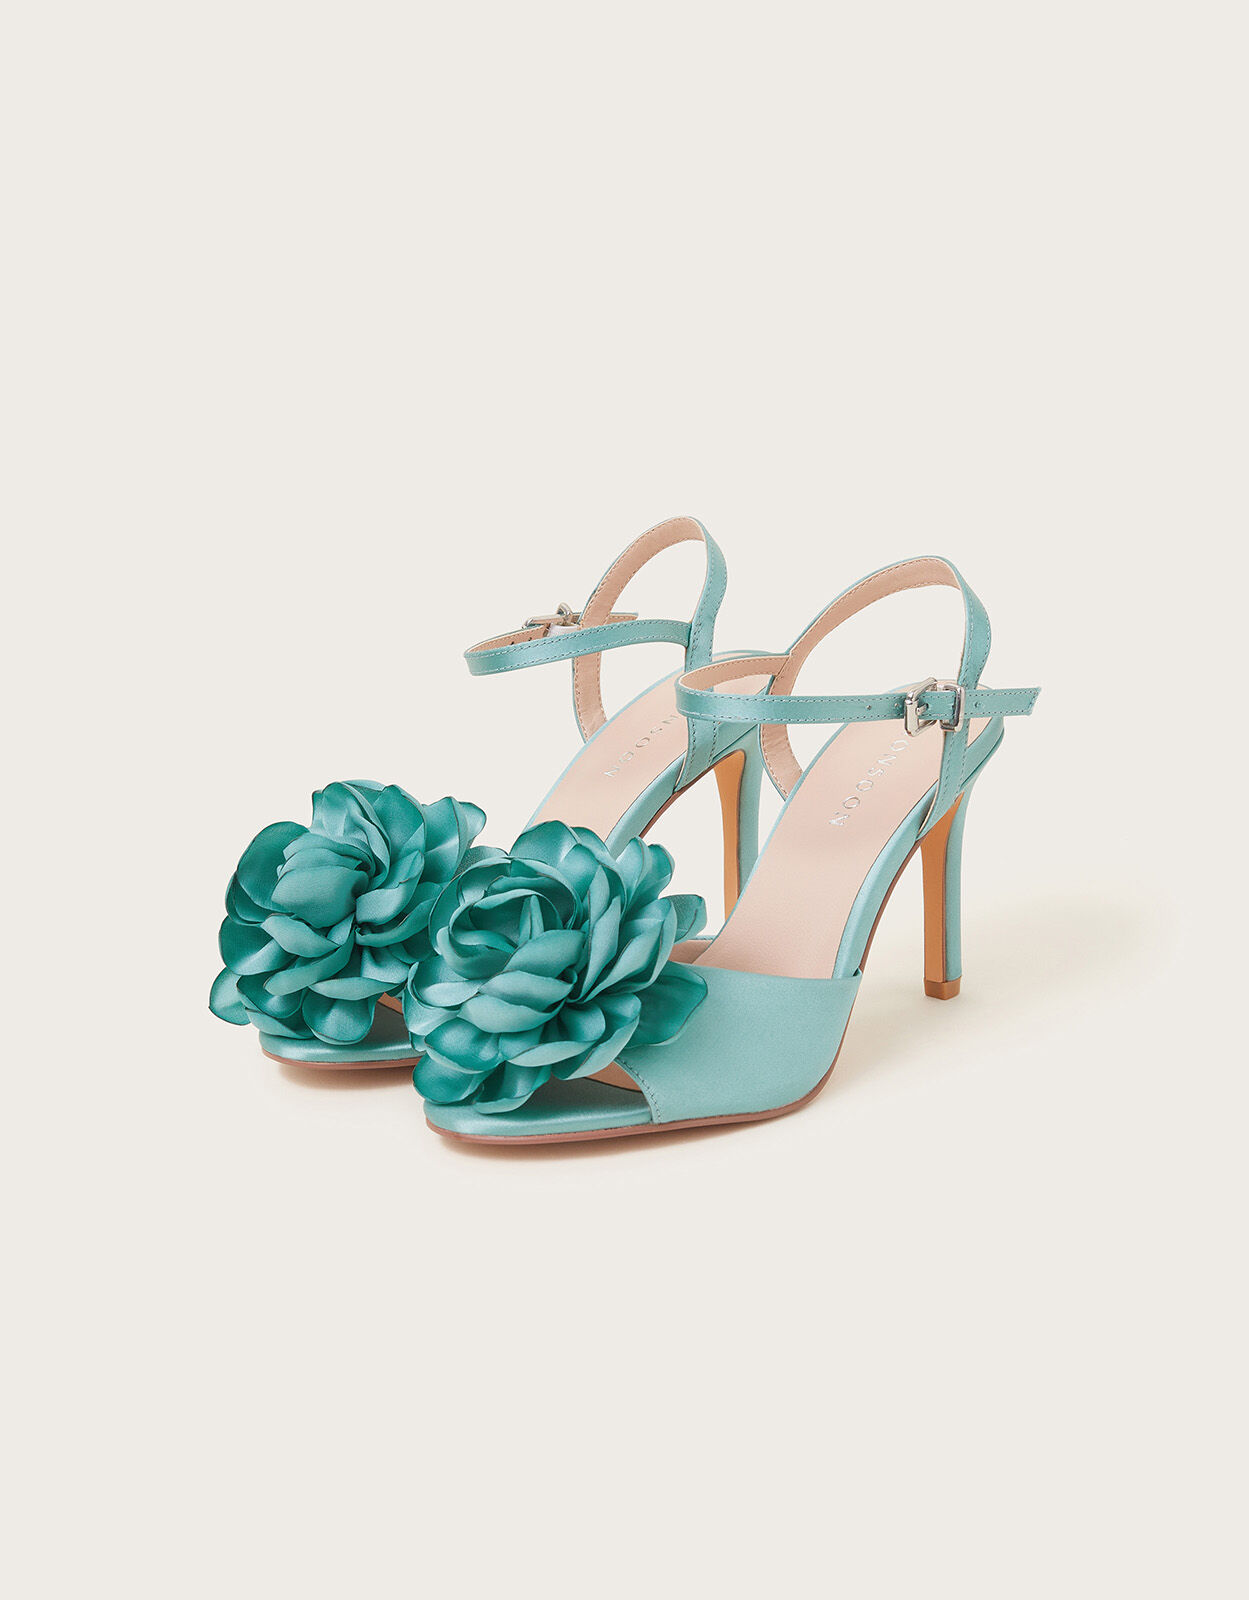 Buy Vintage Heel Shoes Ceremony Décolleté Turquoise Online in India - Etsy